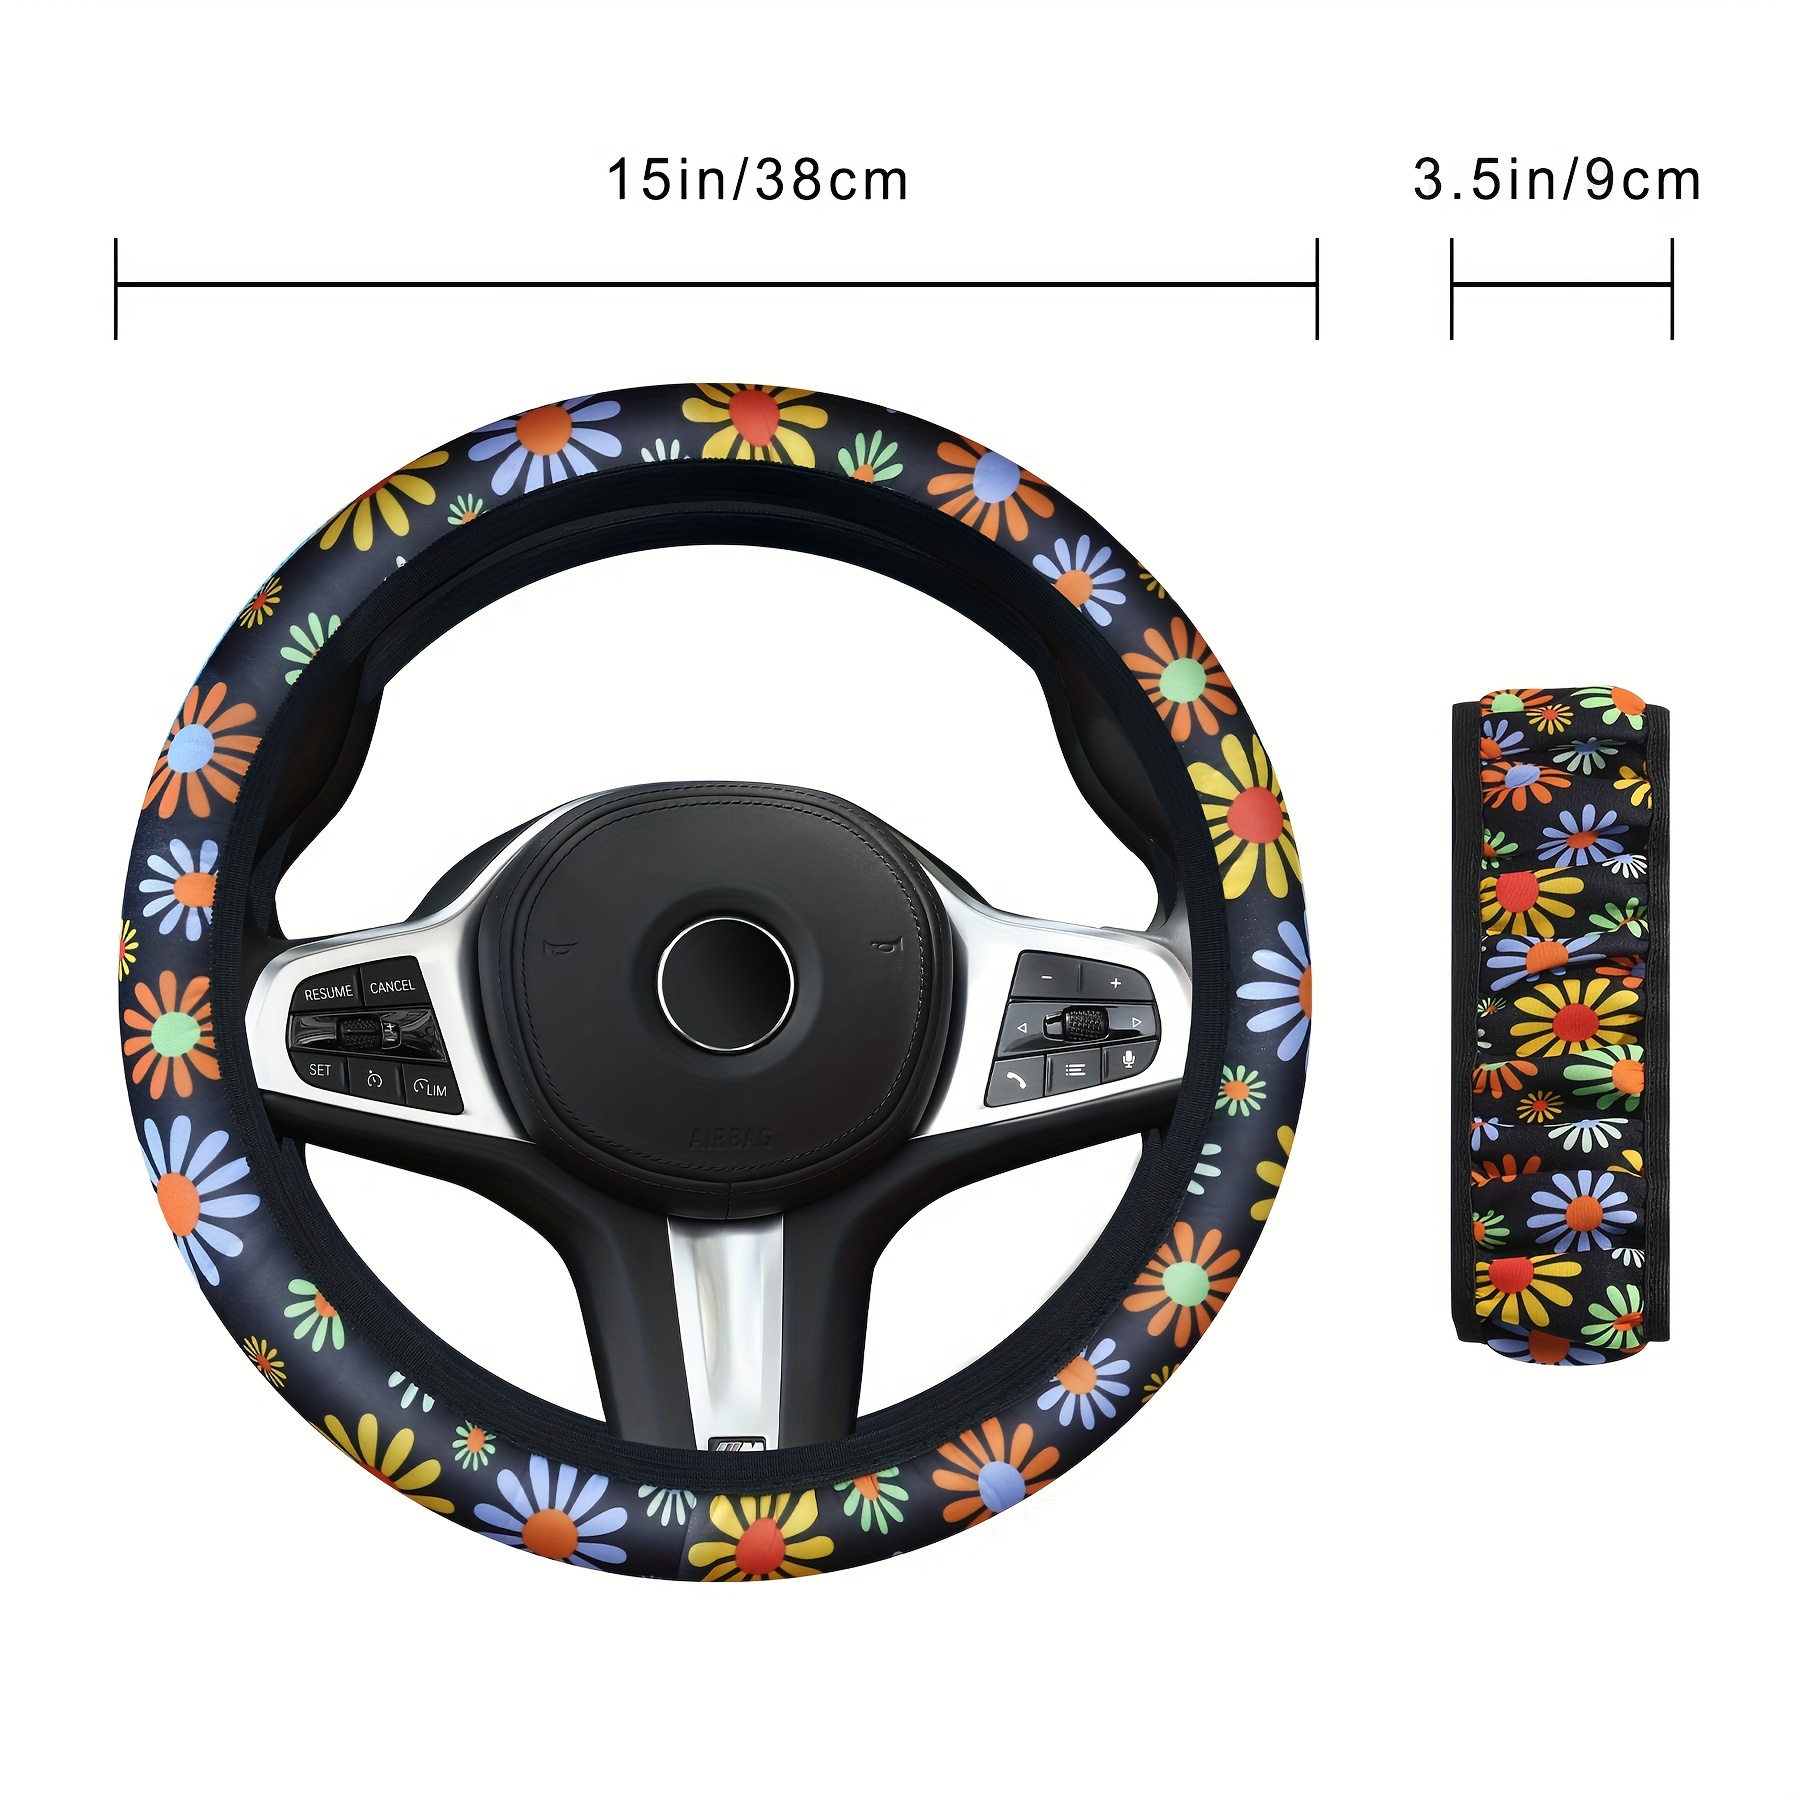 Daisy Steering Wheel Cover Black With White and Yellow Daisy / Car  Accessories for Women / Girls Gift / Hostess Gift Idea / Black Floral. -   Israel